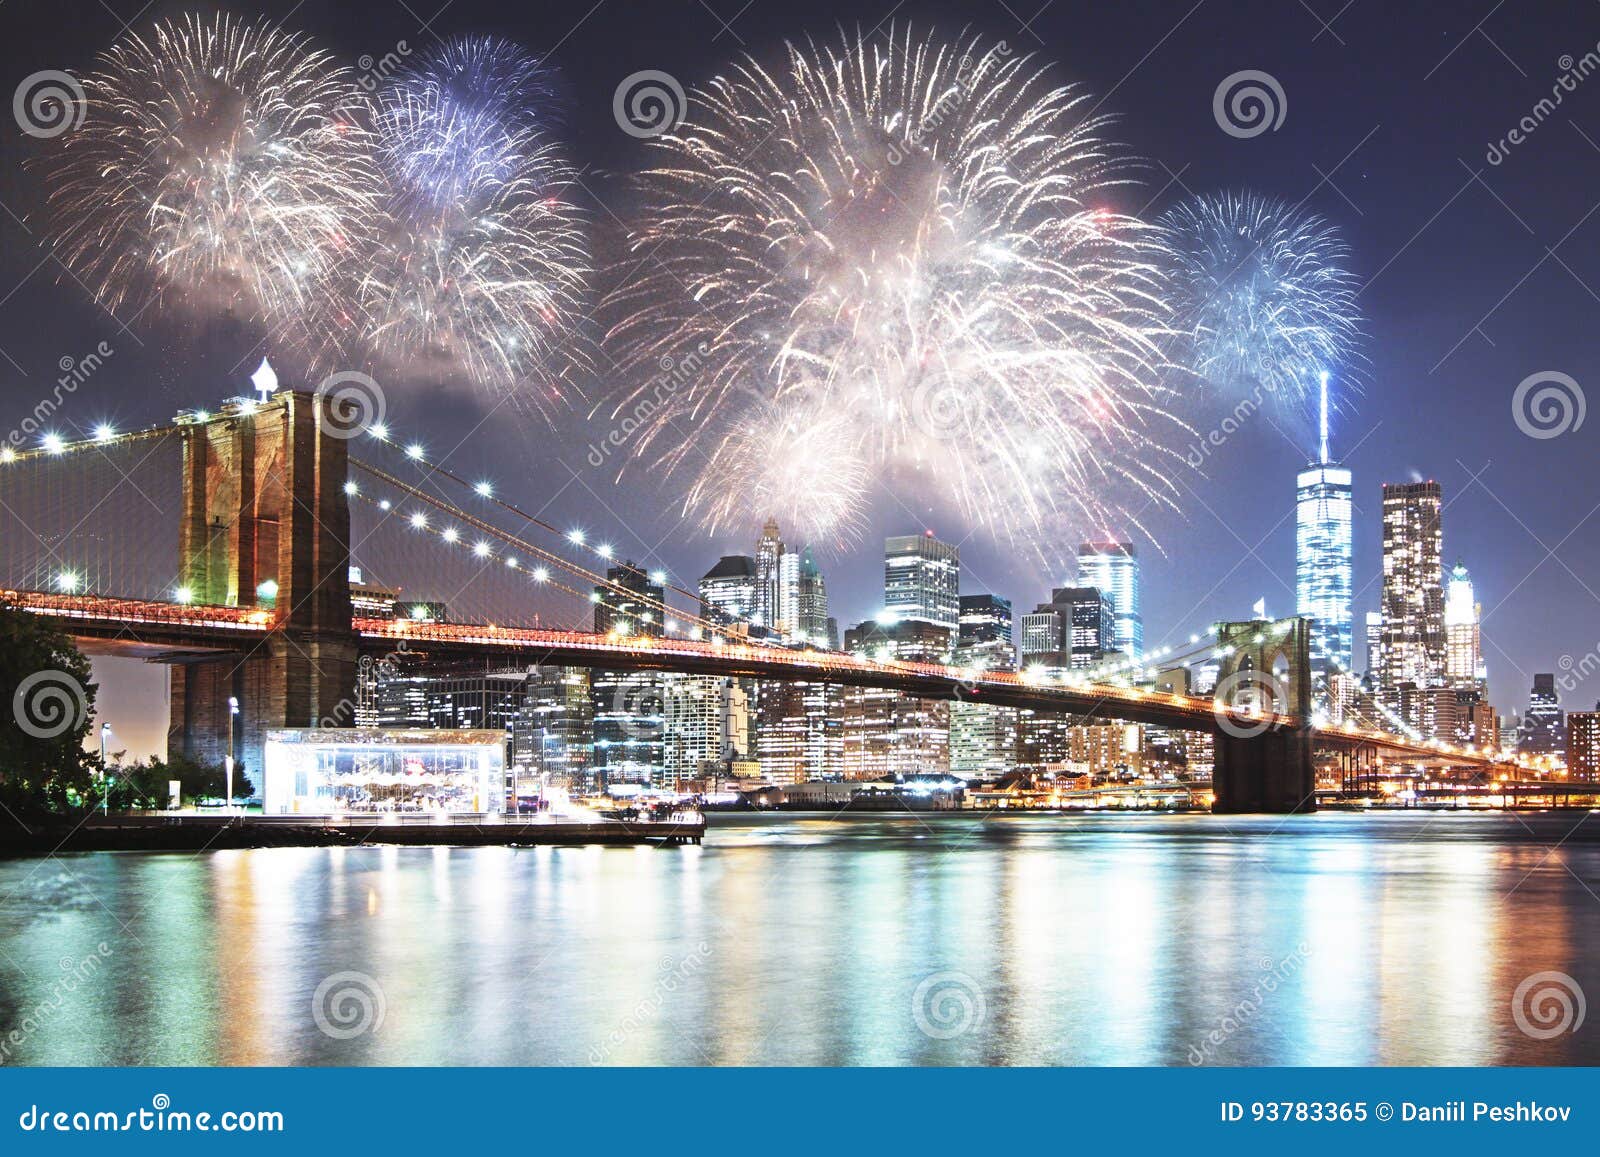 Night City with Fireworks Backdrop Stock Image - Image of fourth ...